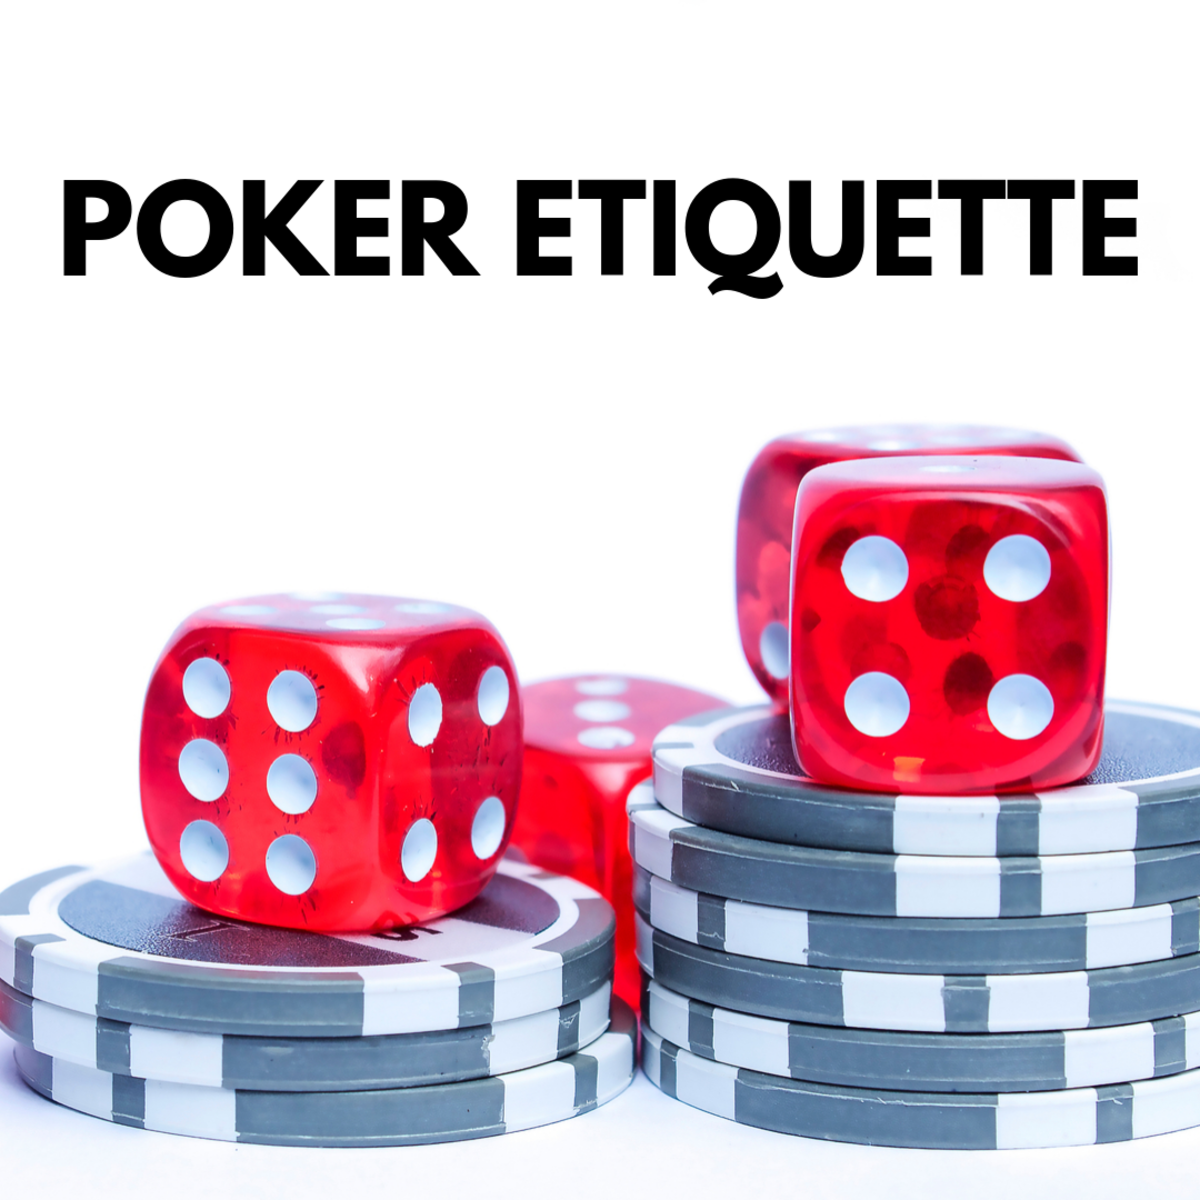 Poker Etiquette: Know the Unwritten Rules of the Felt